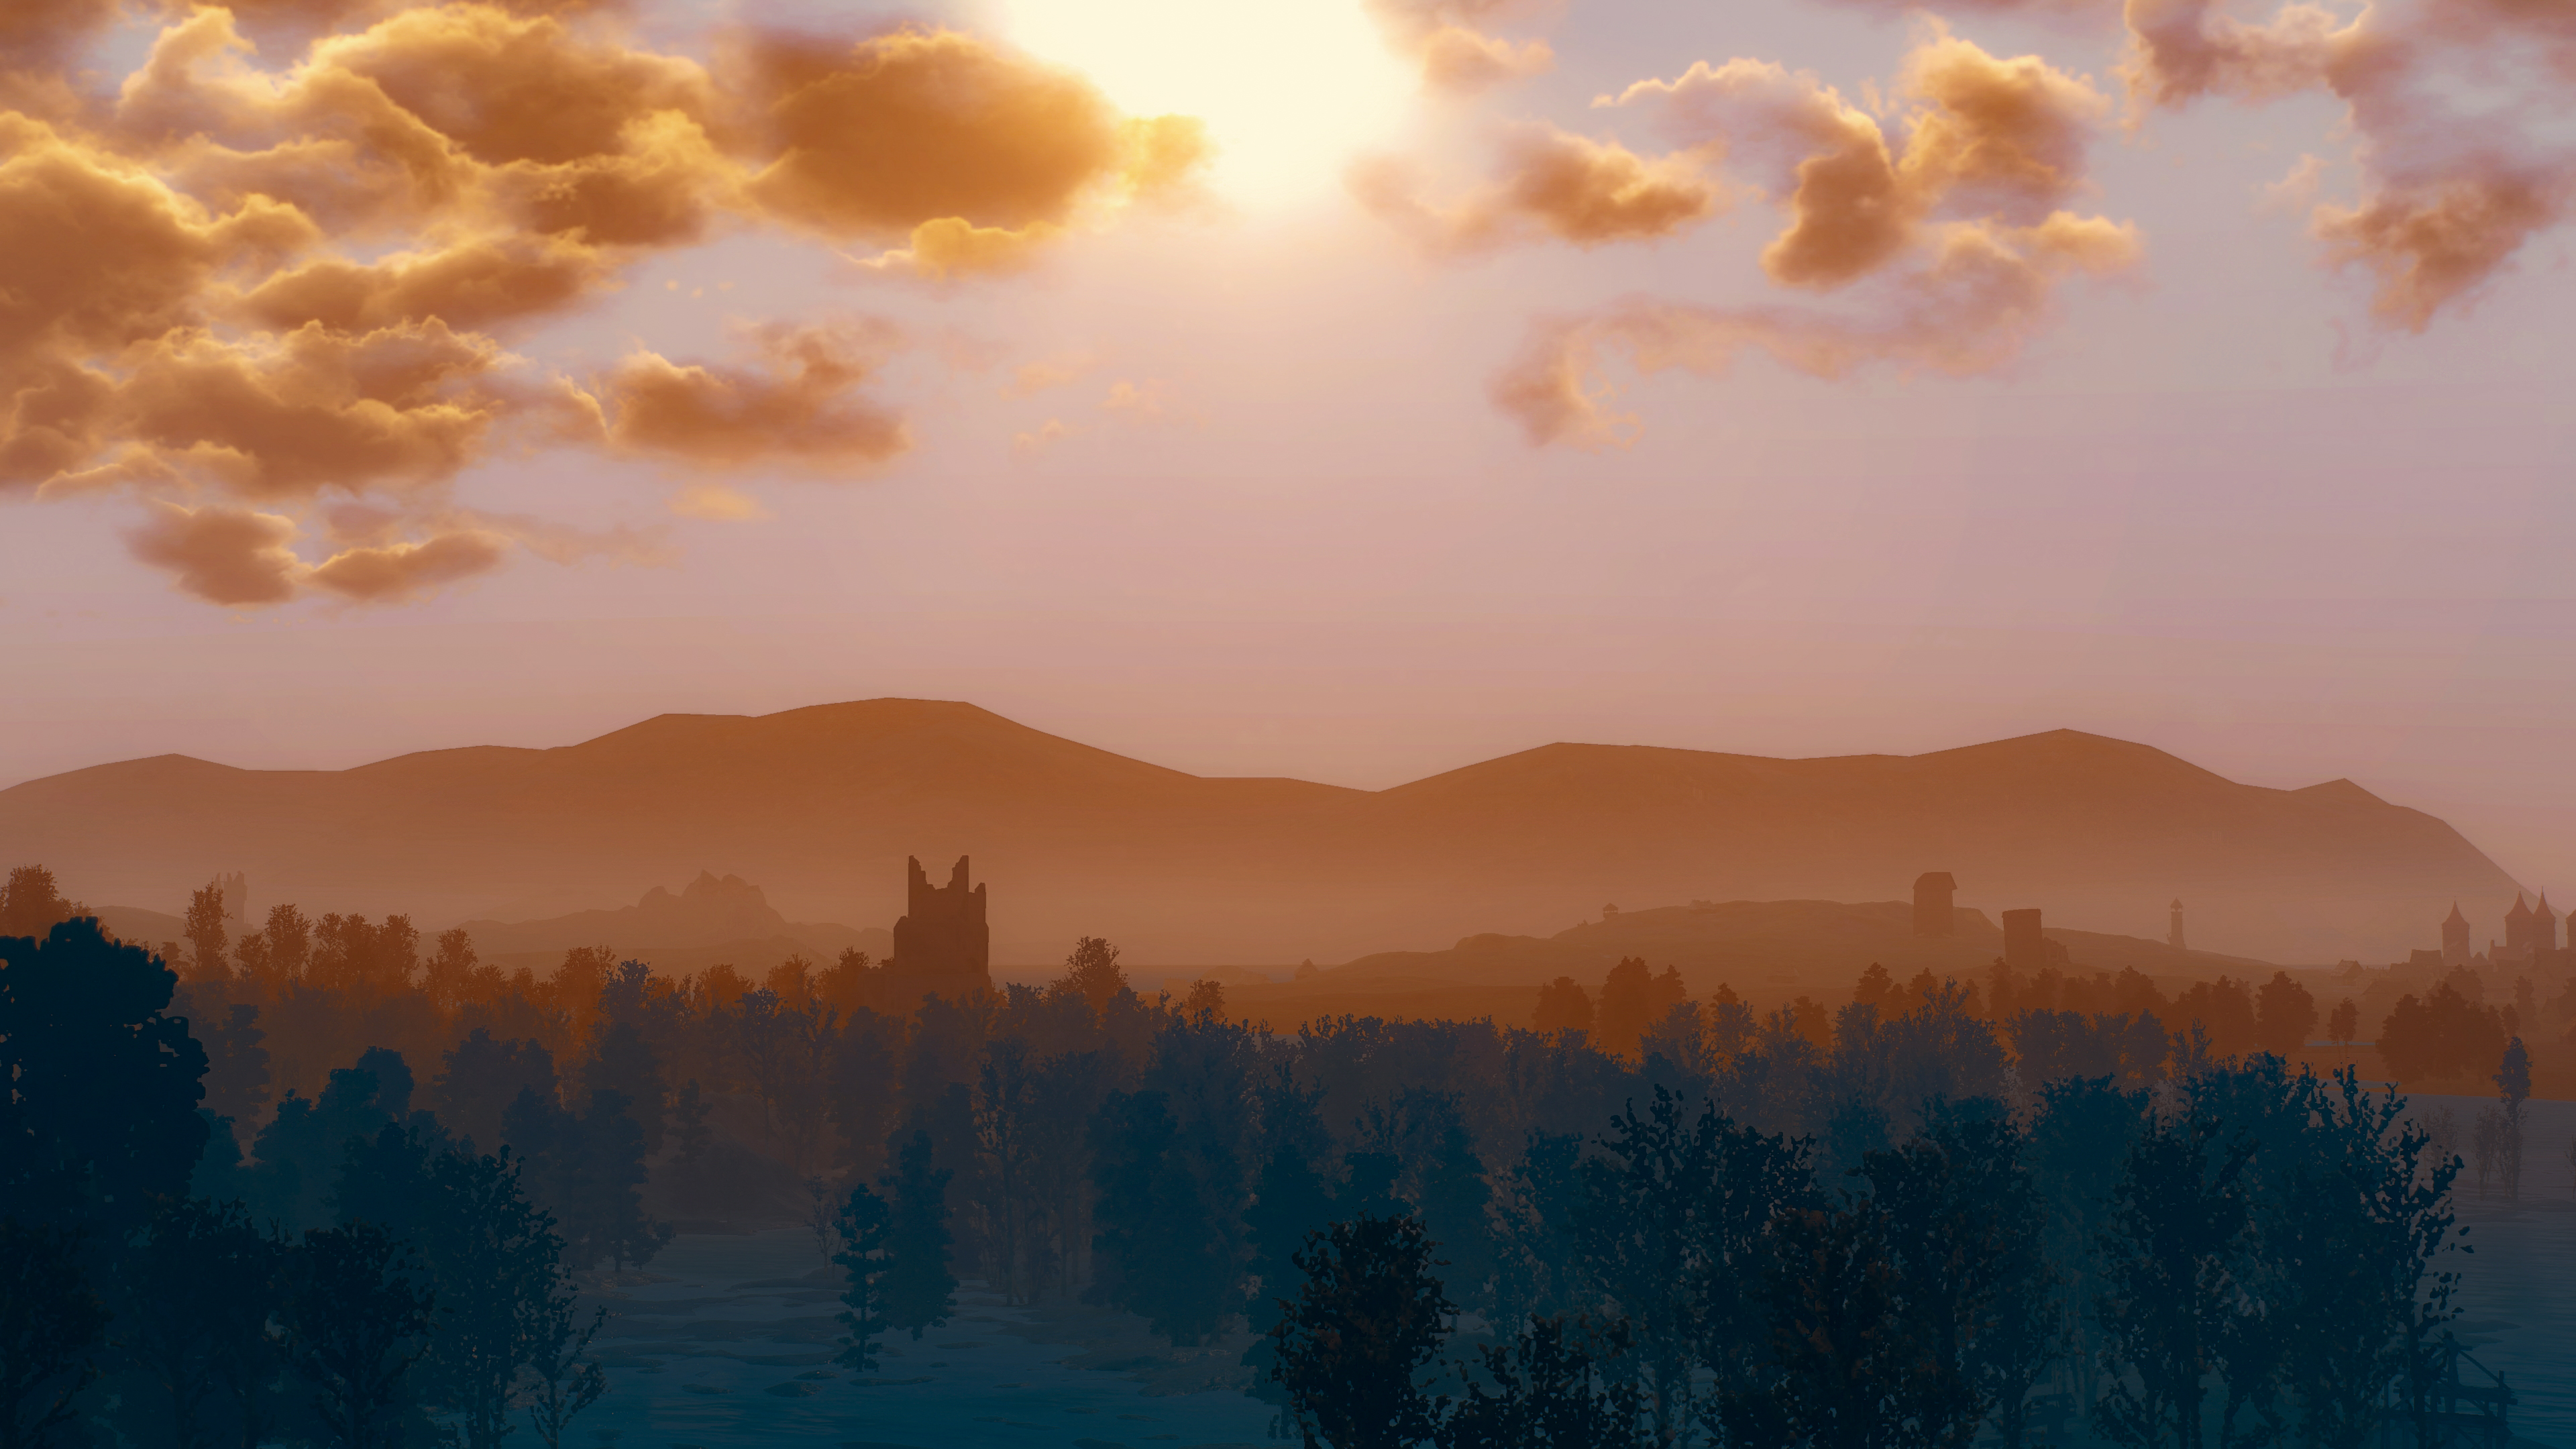 General 3840x2160 The Witcher The Witcher 3: Wild Hunt screen shot PC gaming Nvidia Ansel